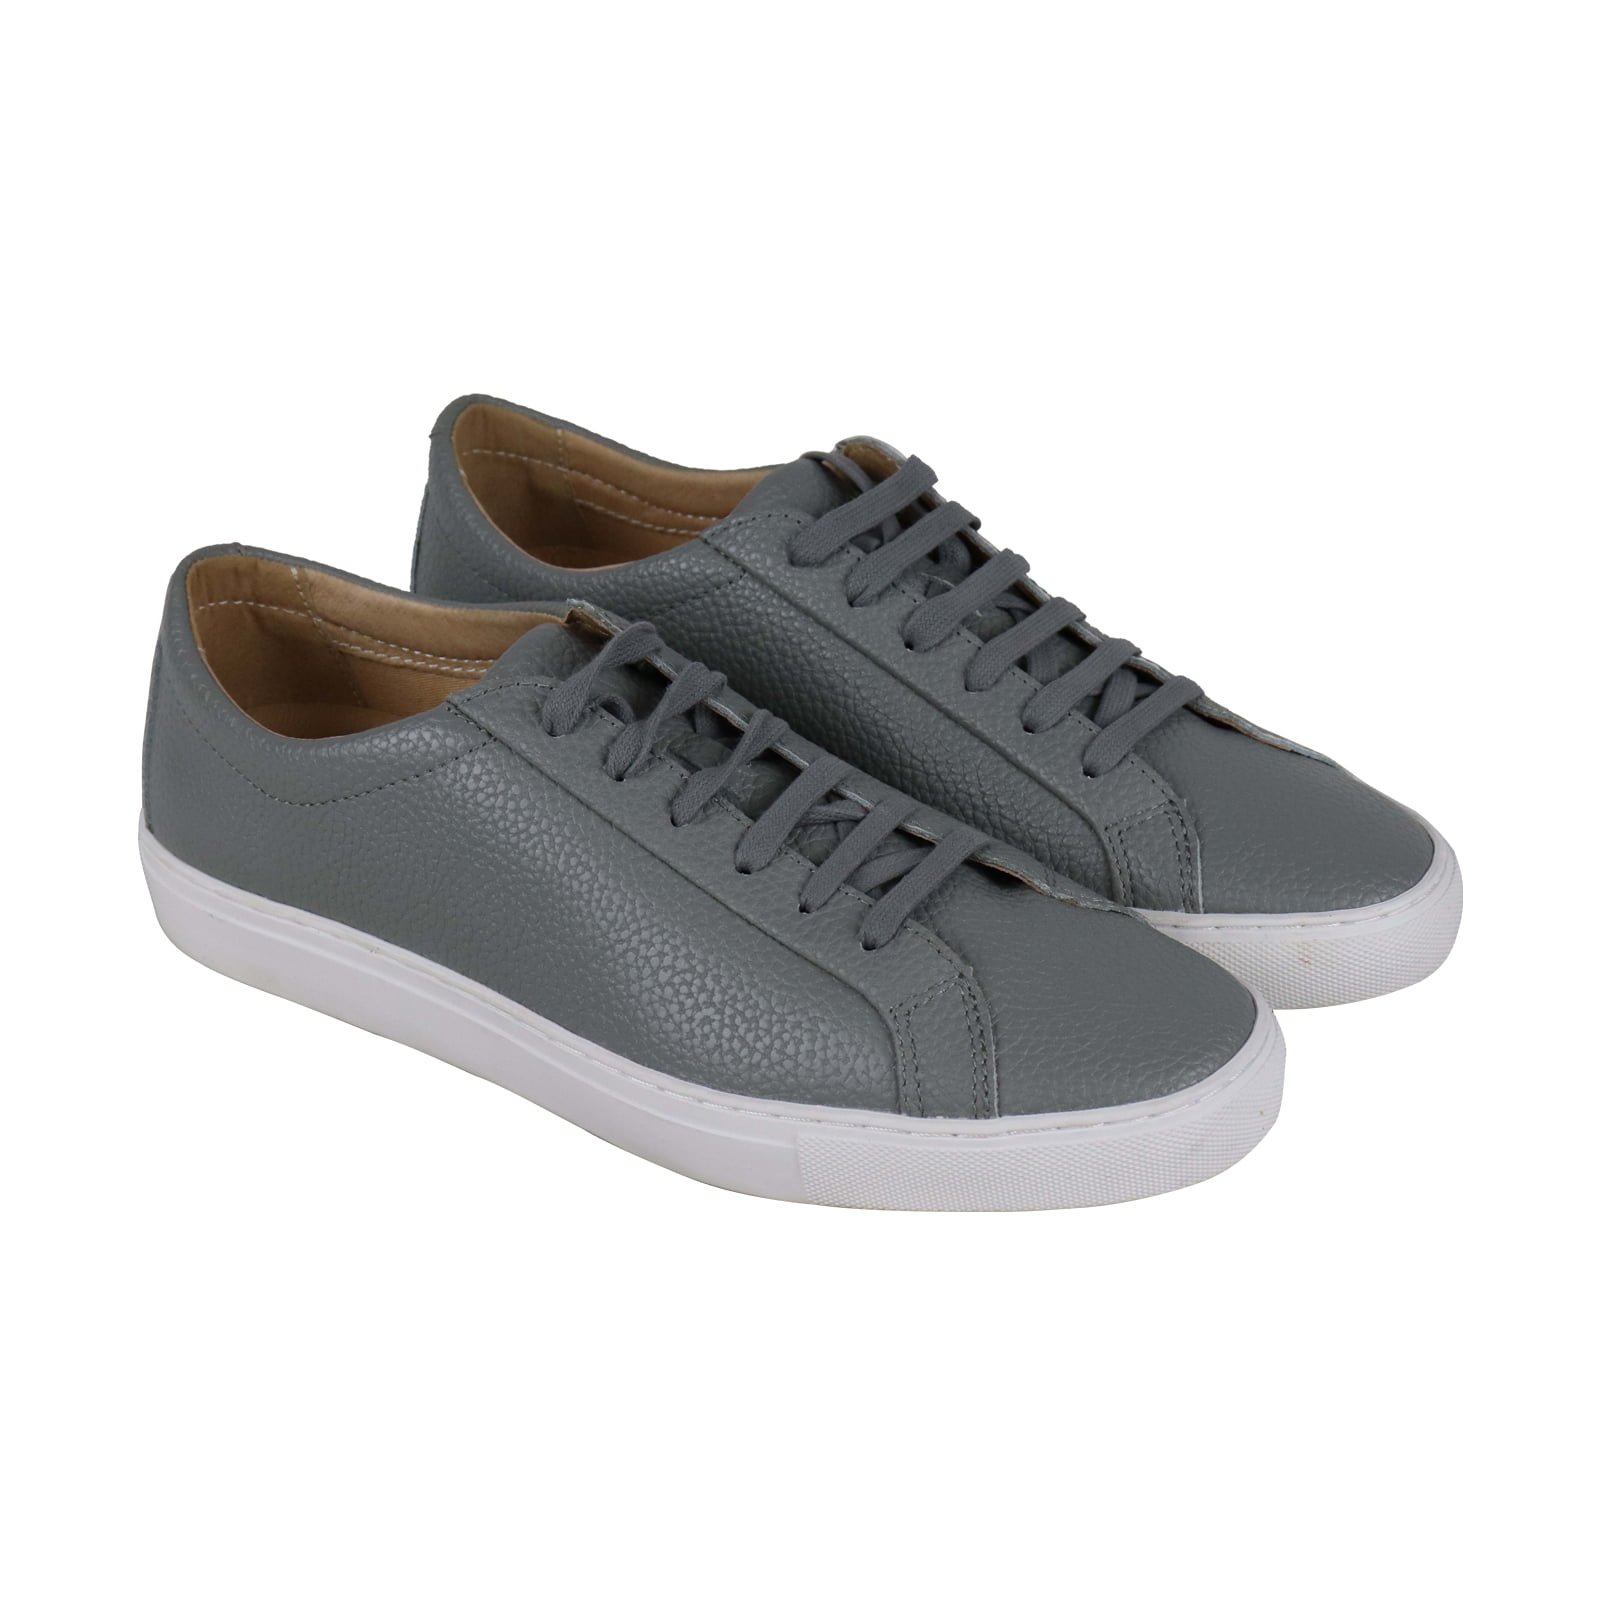 TCG - TCG Kennedy Mens Gray Leather Low Top Lace Up Sneakers Shoes ...